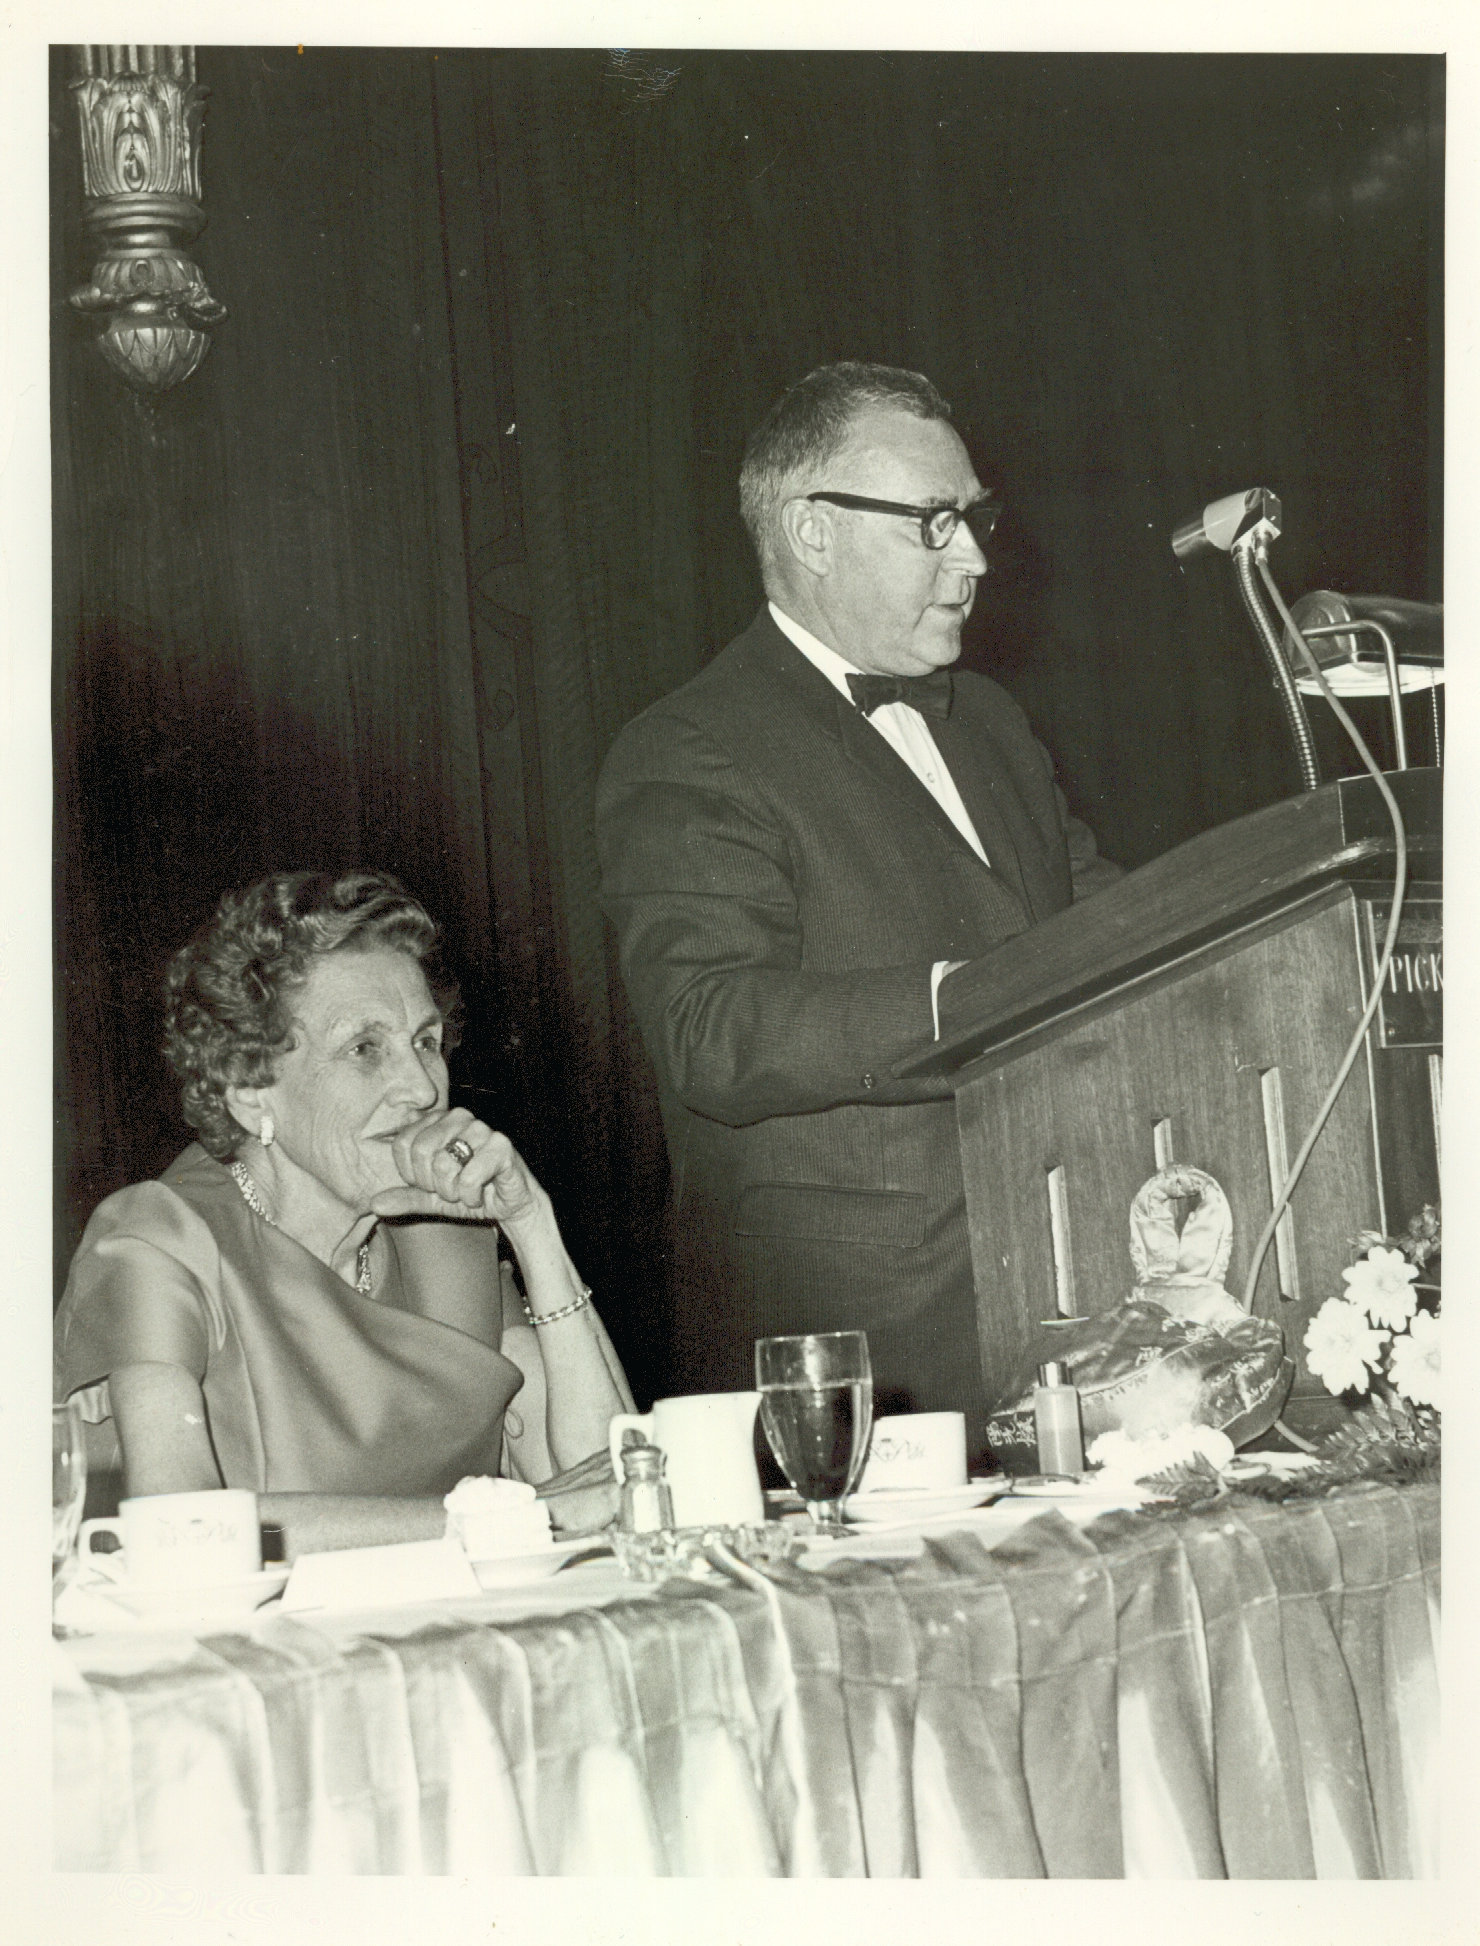 Mary Switzer and Richard Hoover at banquet, ca. 1965